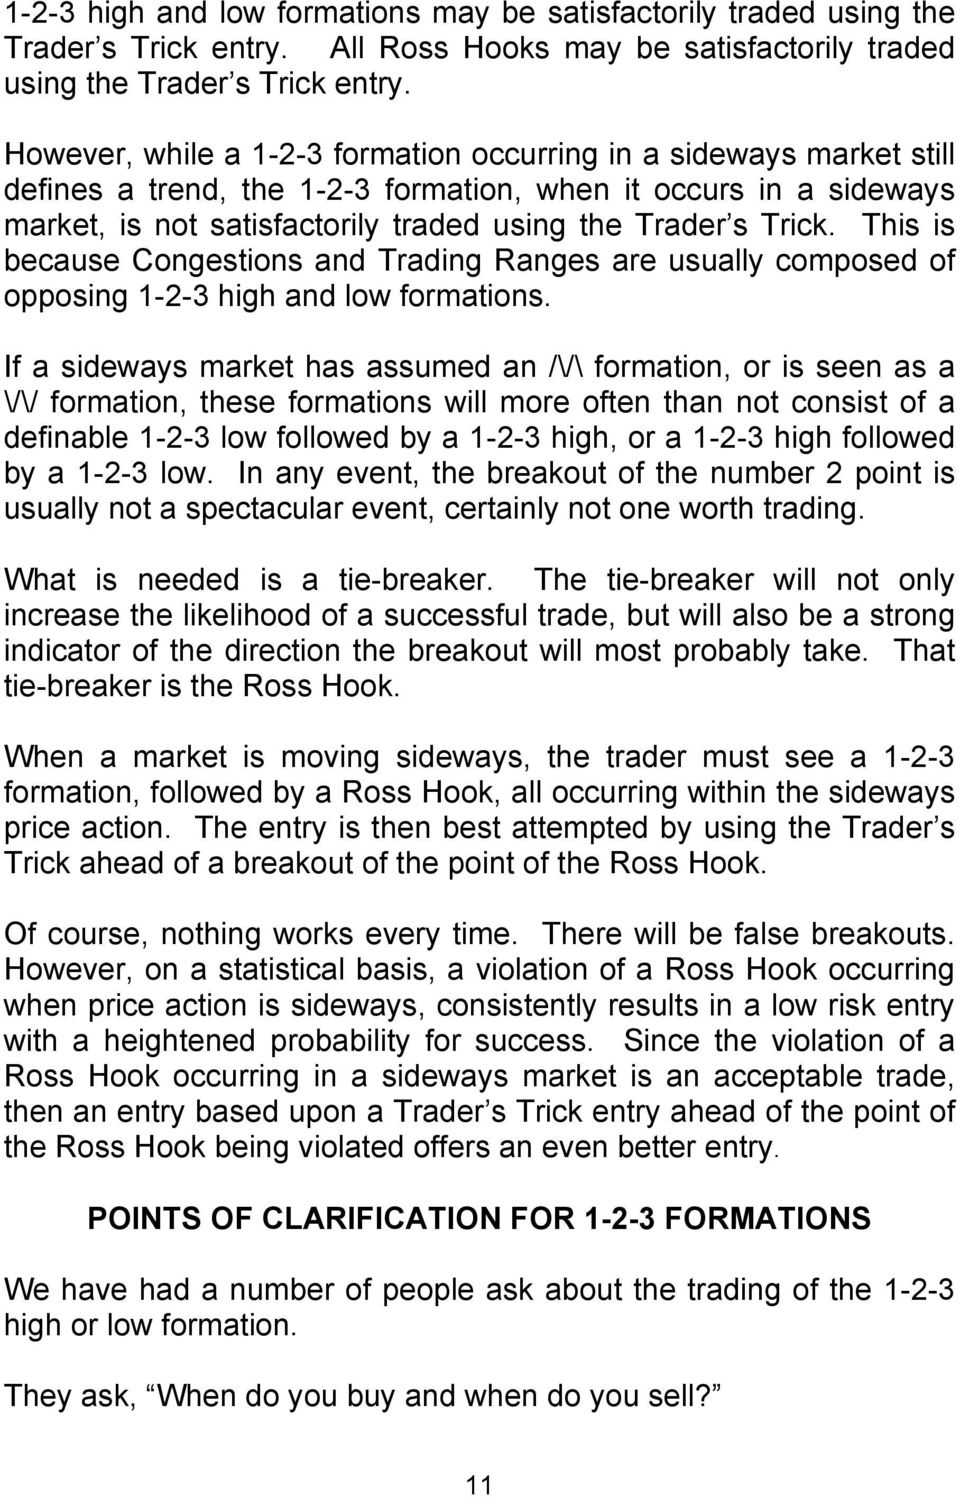 This is because Congestions and Trading Ranges are usually composed of opposing 1-2-3 high and low formations.